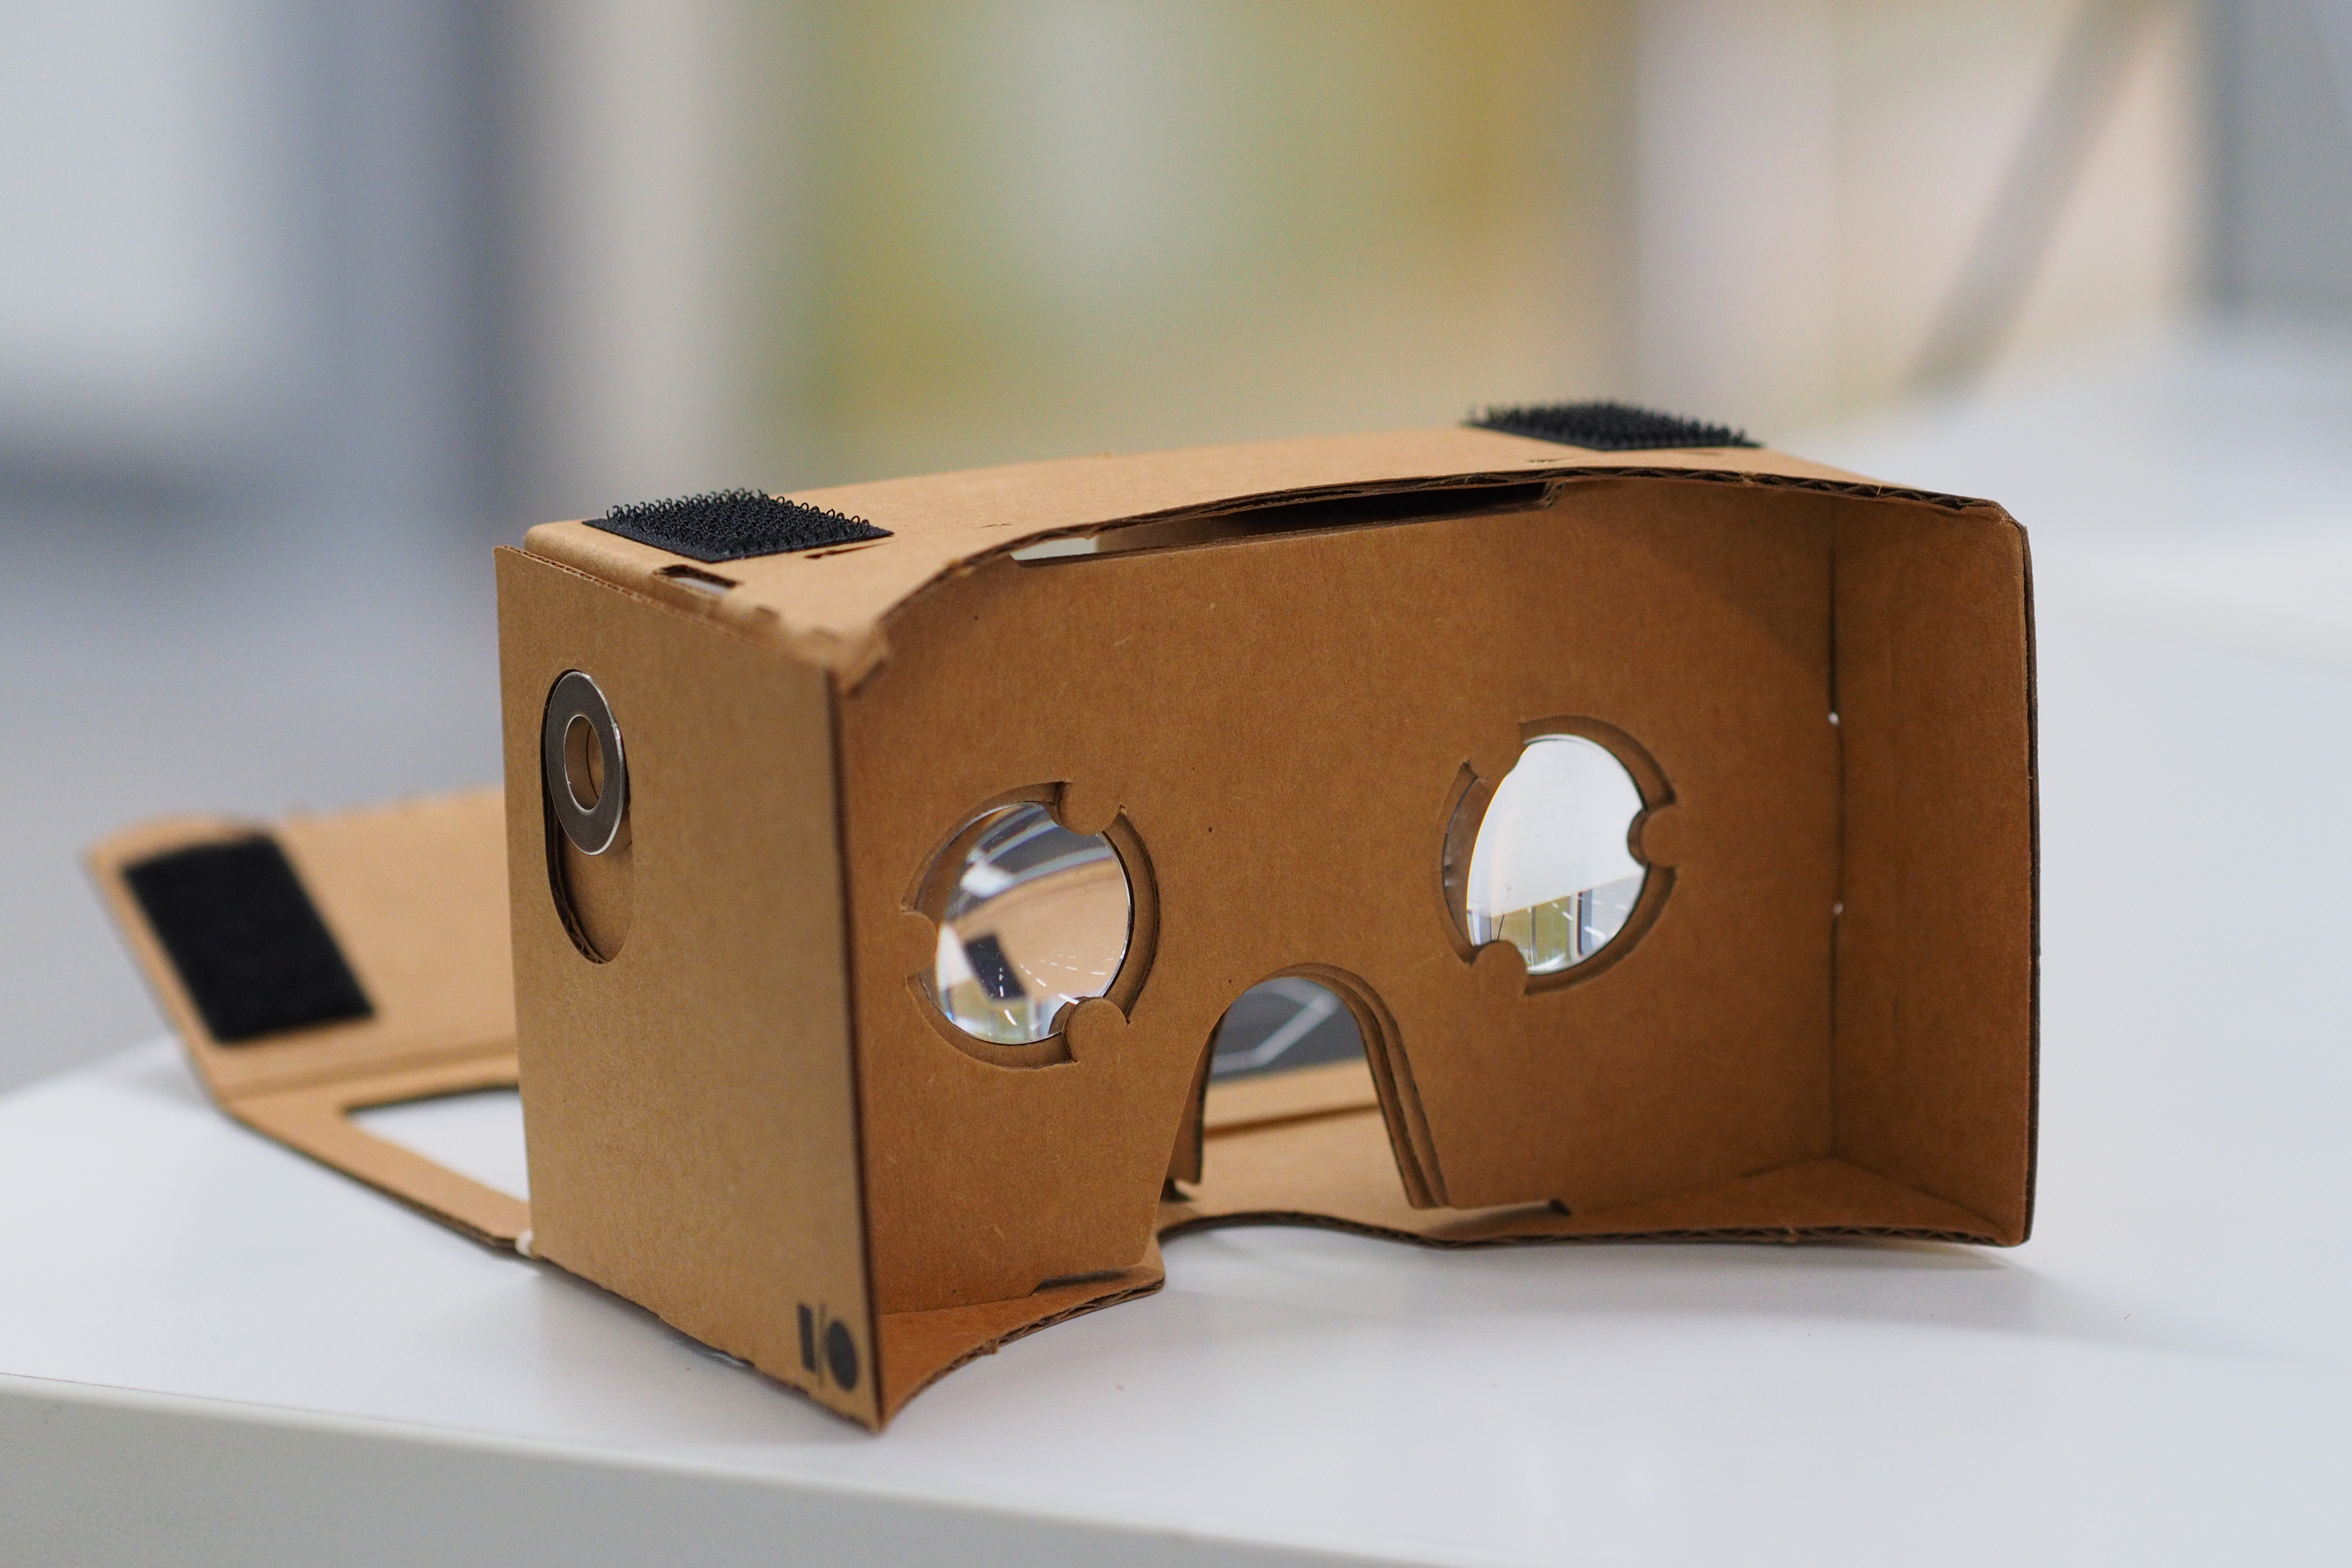 Virtual Reality’s Expensive. But Is Google Cardboard